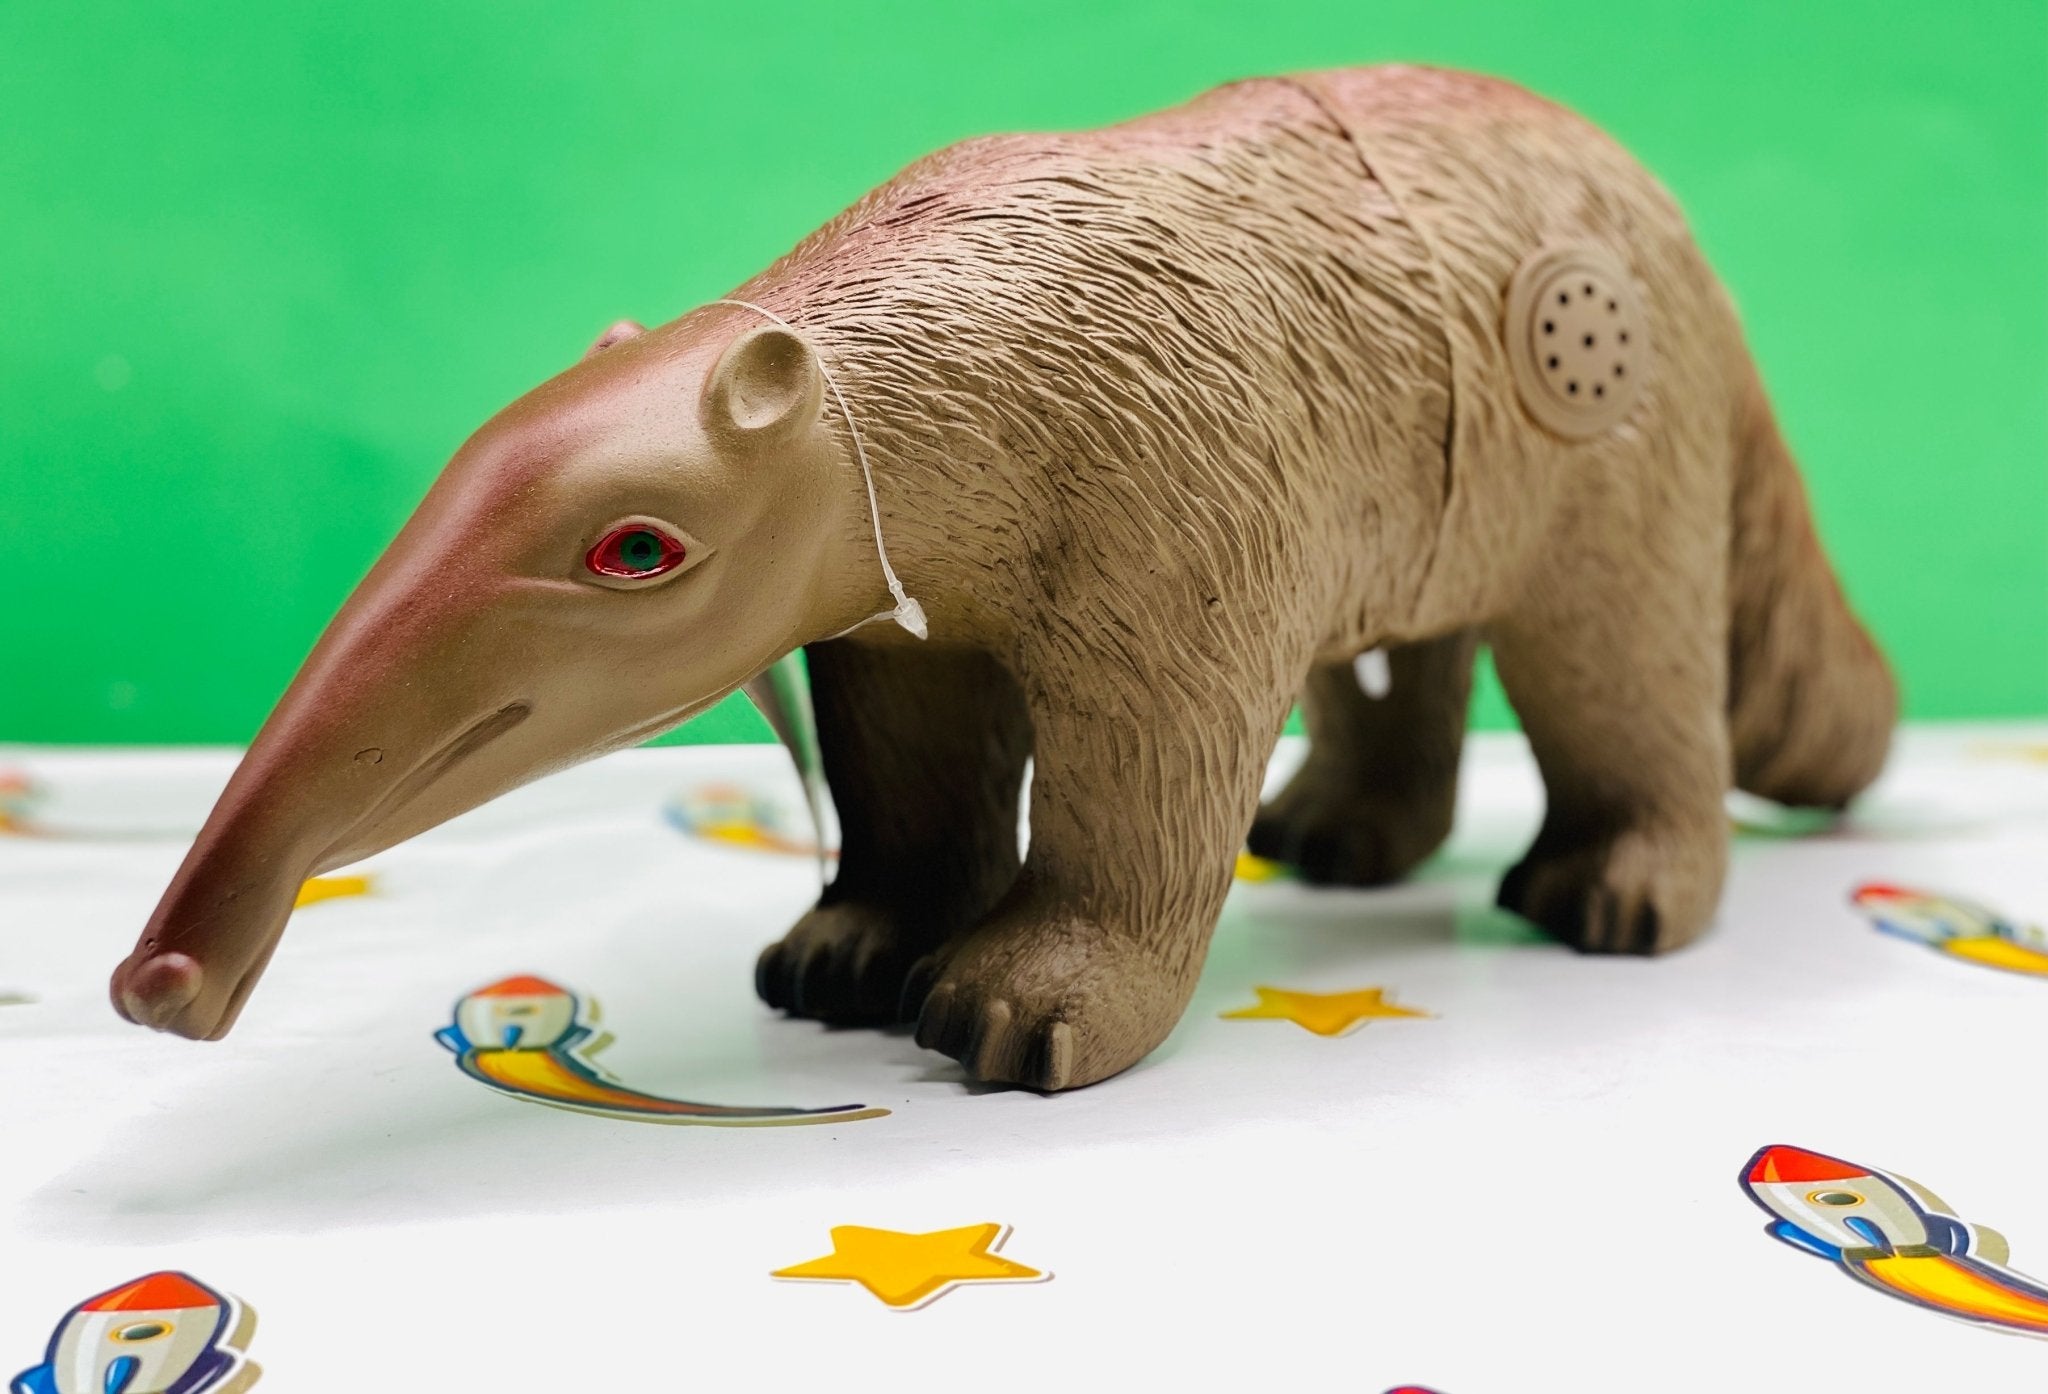 Anteater Toy For Kids - 22074AE - Planet Junior